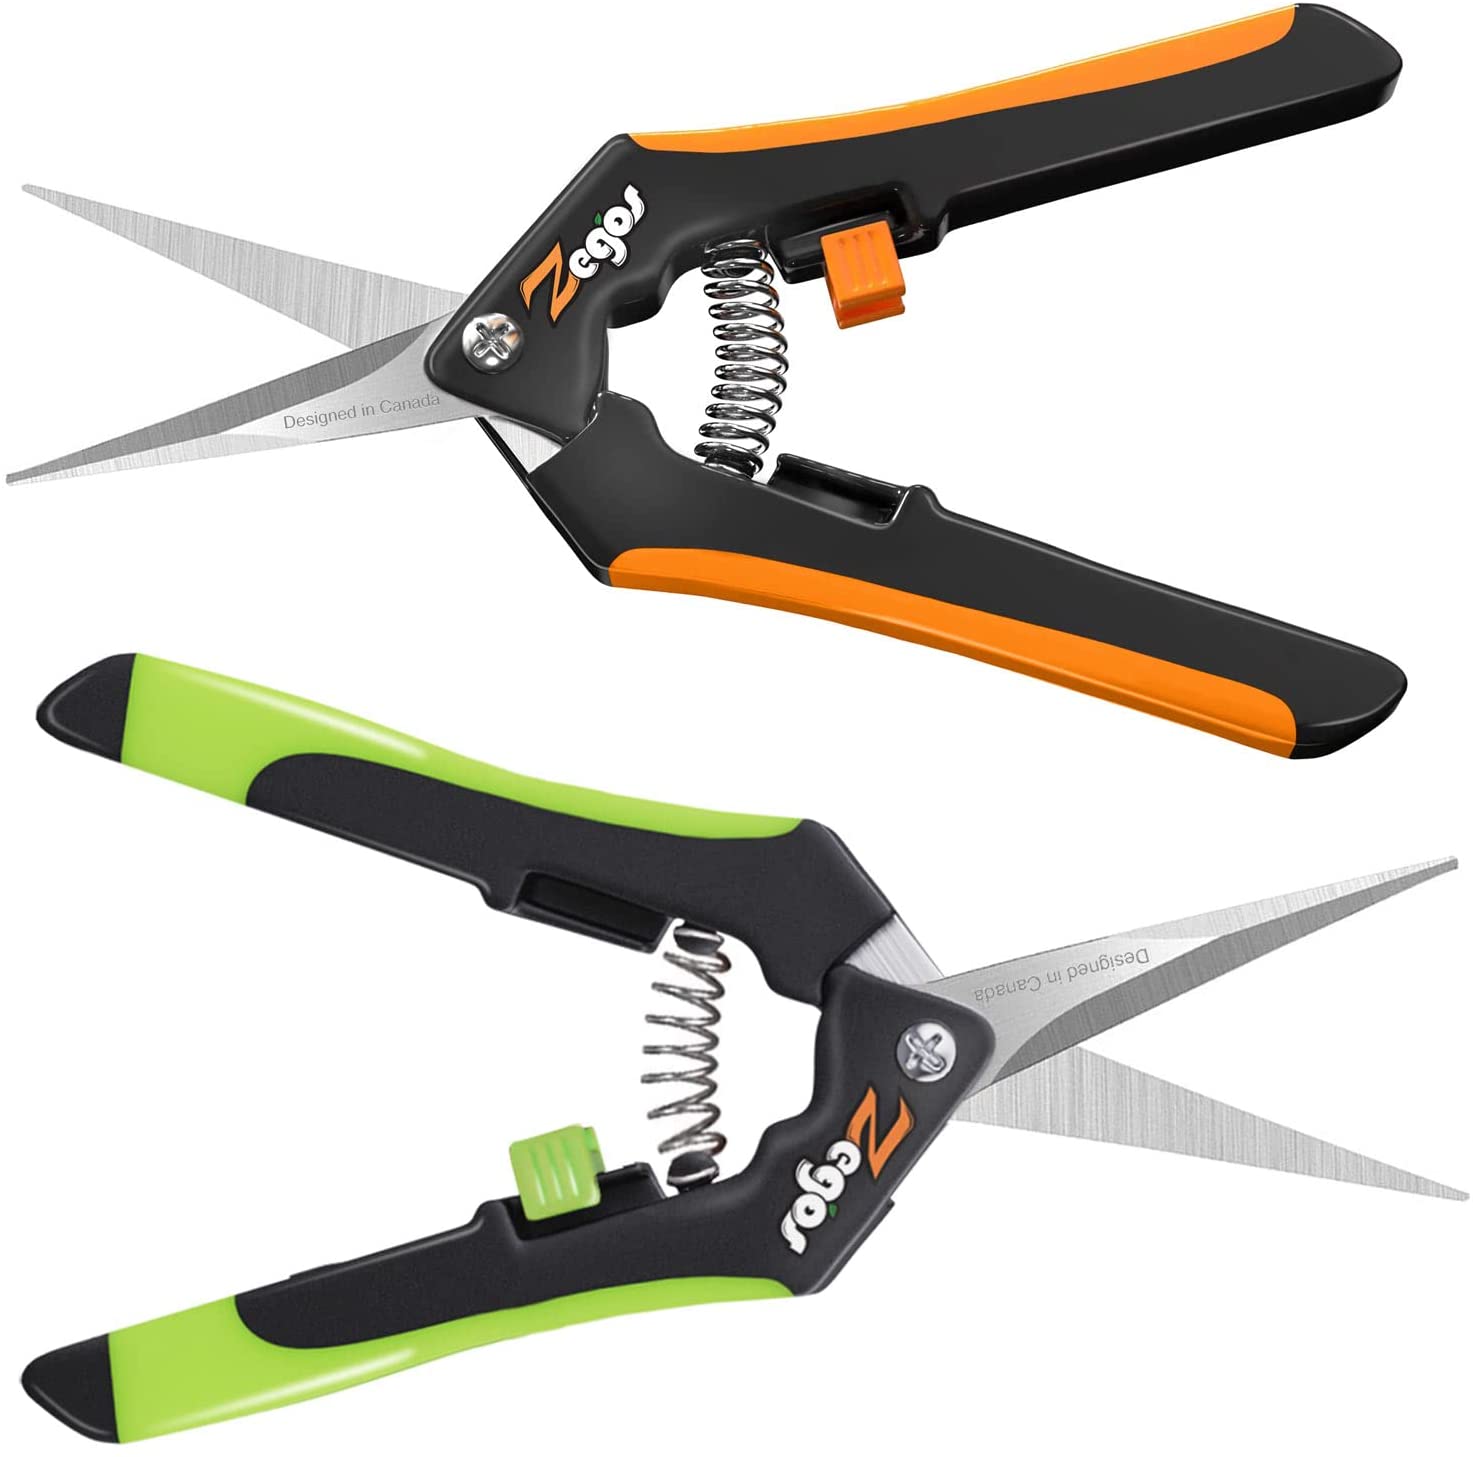 Zegos Trimming Scissor Combo Set, 1x 7 All-Metal Pruning Snips with 3 Long  Blades, and 1x 6 Pruning Shears Stem and Branch Cutter for Vine Cutting,  Grape, Berry, Herb Trimming (2 Packs Combo Kit)